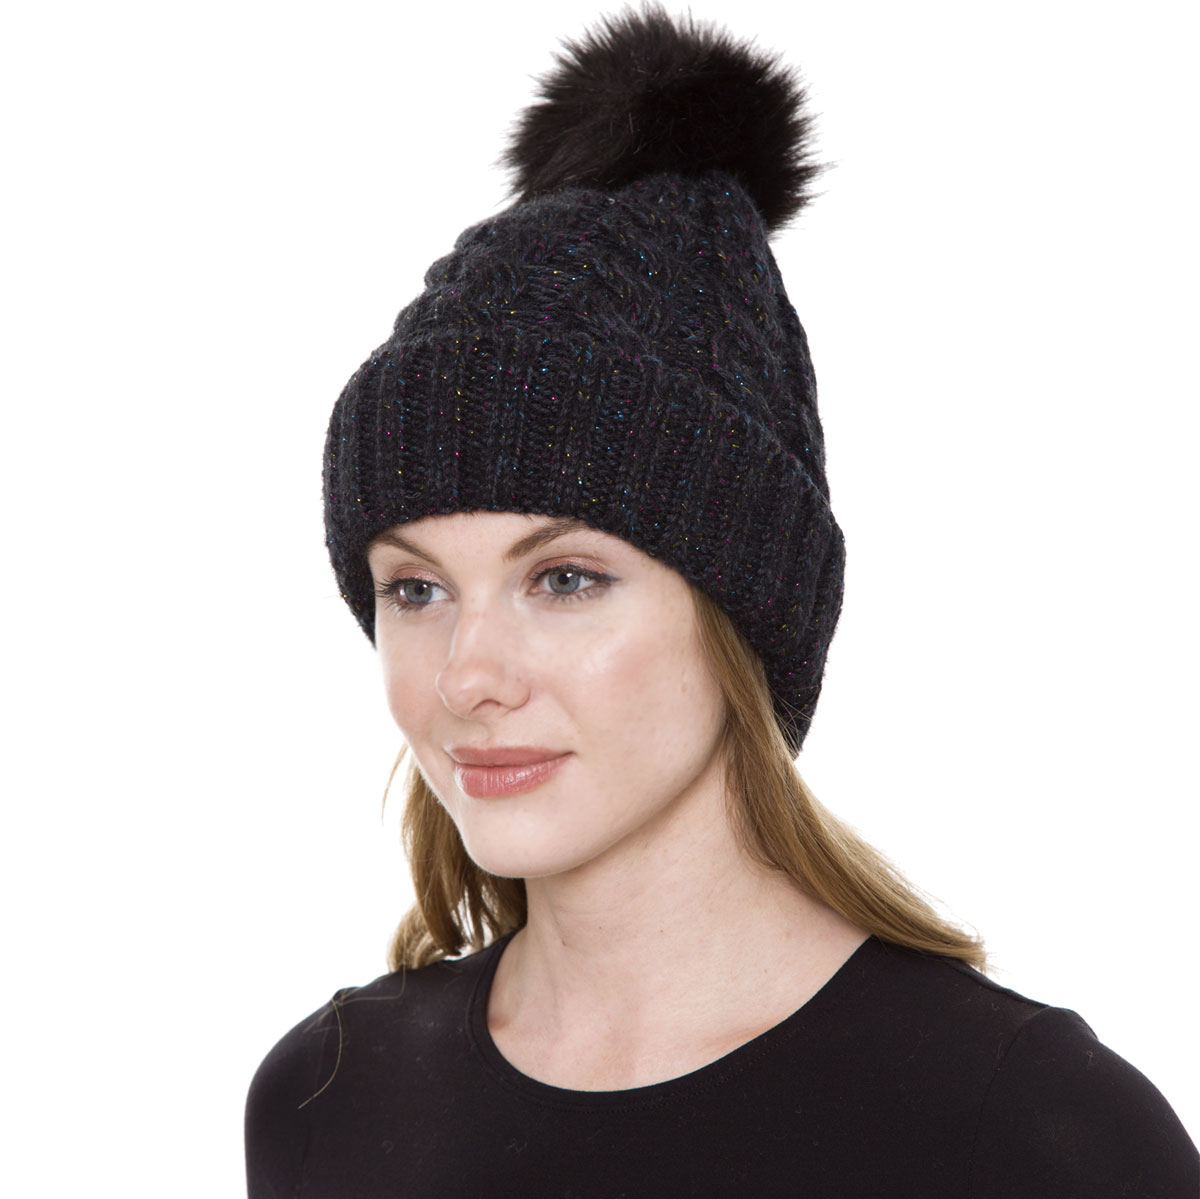 JH248 Black Pom Pom Cable Knit Sparkle Hat with Sherpa Lining 